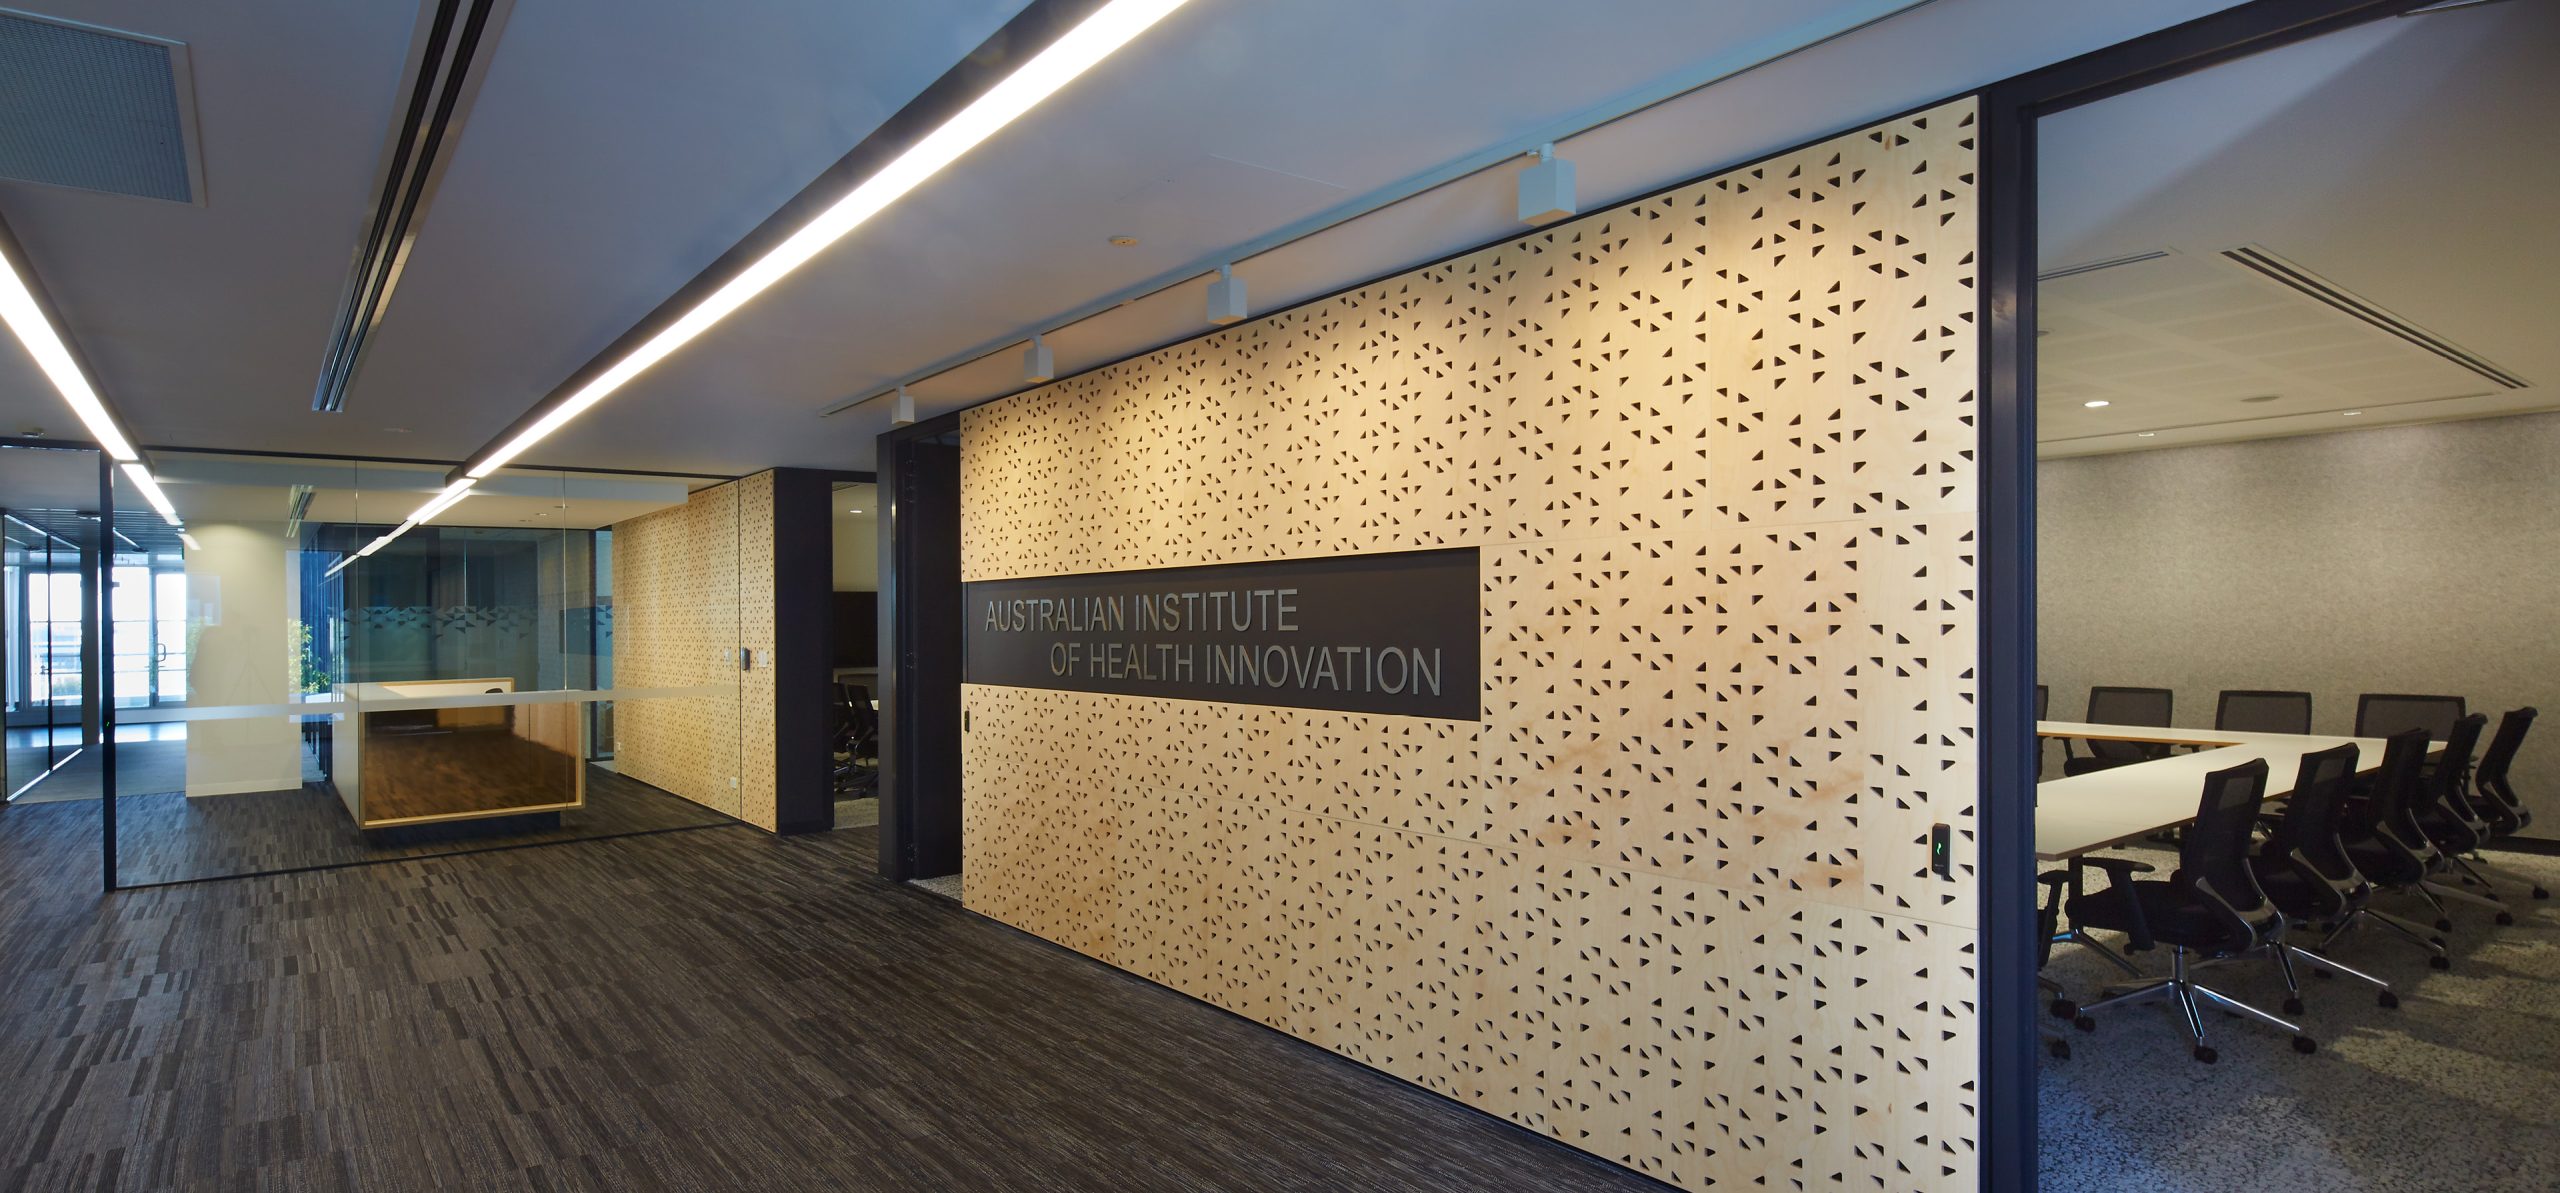 2 foyer entrance australian institute of health innovation taylor construction education fitout